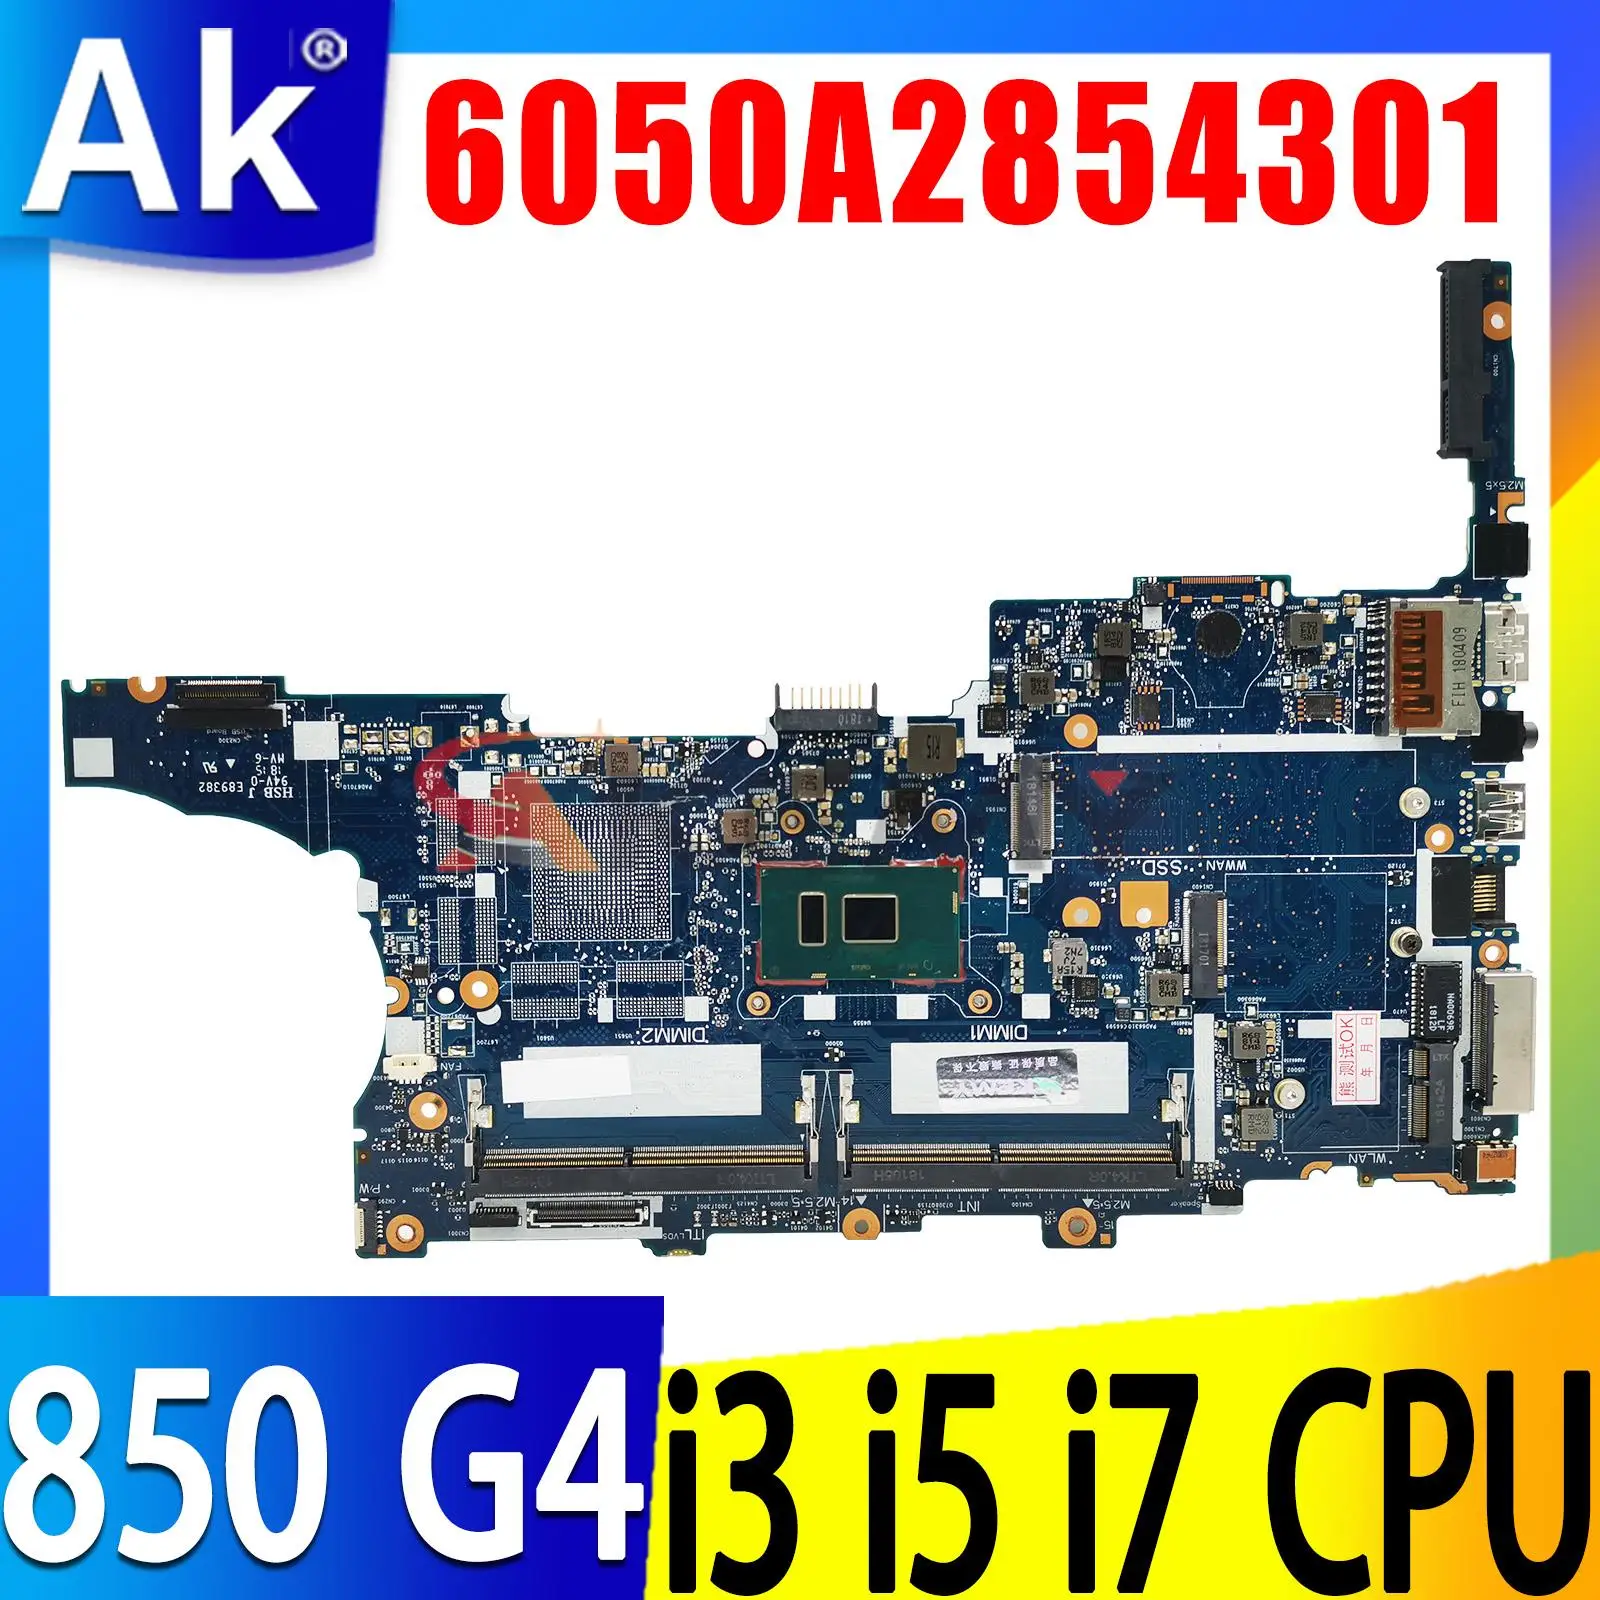 

For HP Elitebook 840 G4 850 G4 Laptop Motherboard with I3 I5 I7 7th Gen CPU 6050A2854301 Mainboard 216-0868010 GPU